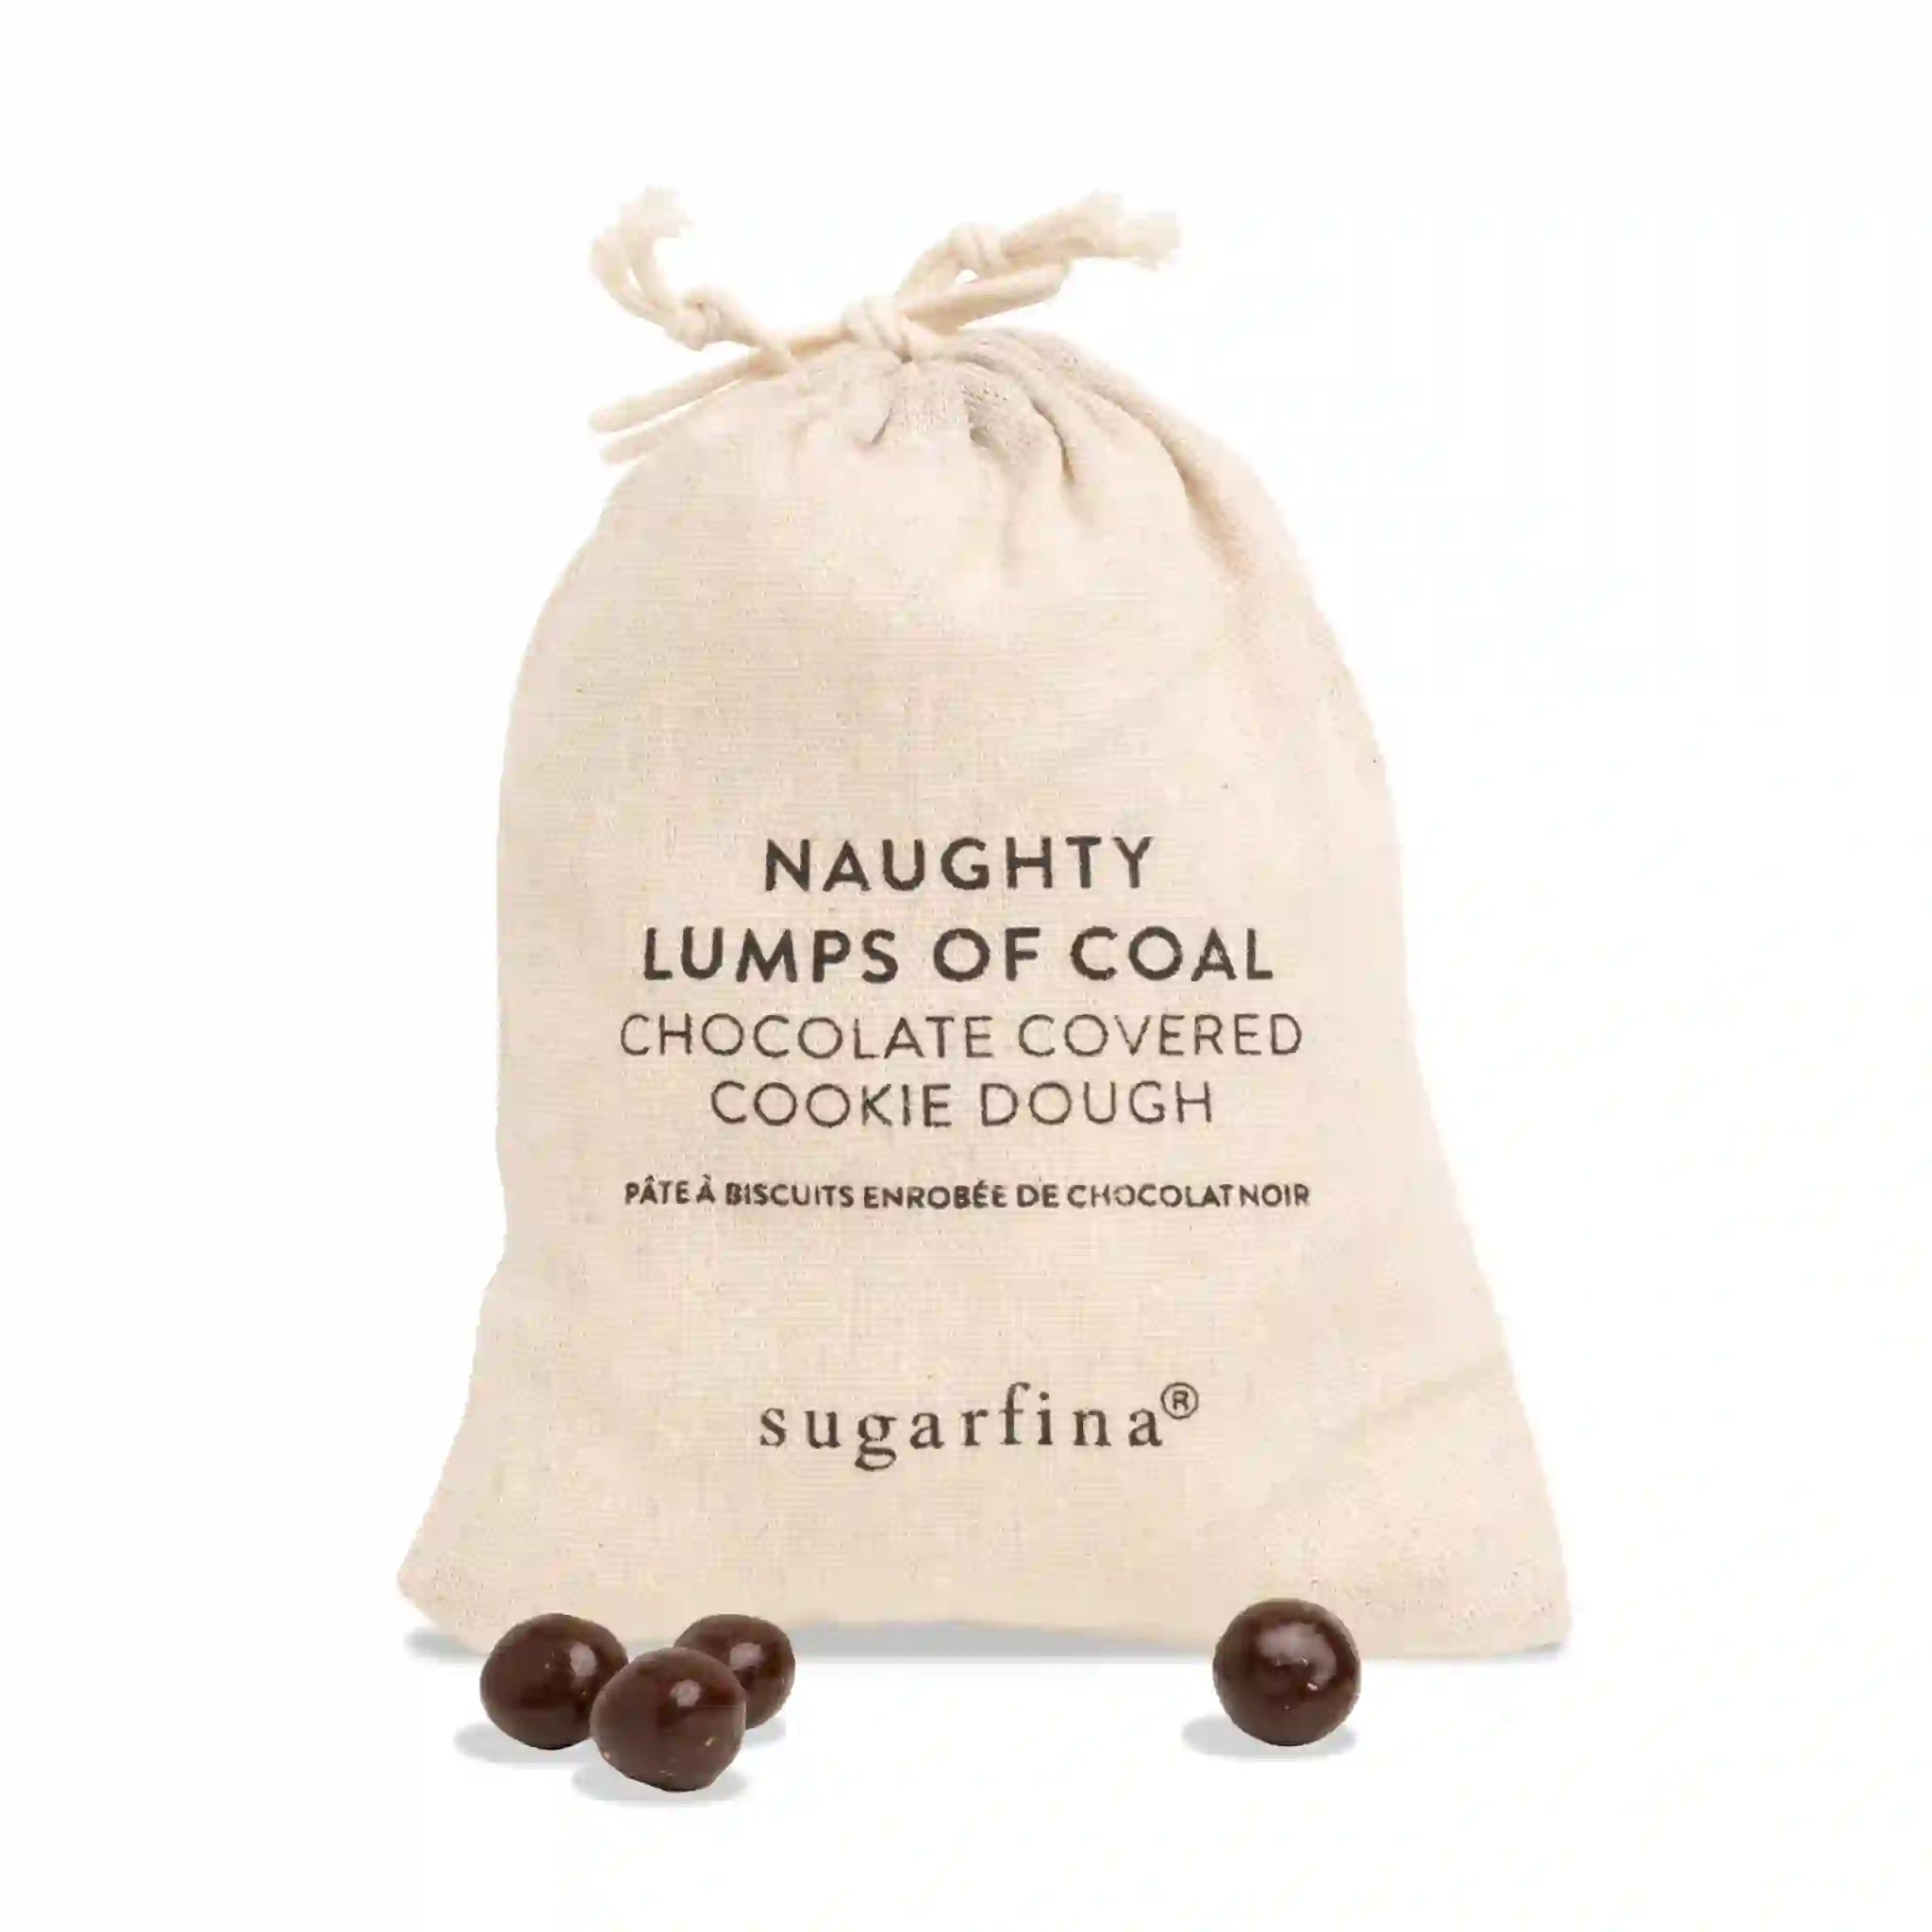 On a white background is a tan bag that holds the candy inside of the canister. The outside of the bag has black text that reads, "Naughty Lumps of Coal Chocolate Covered Cookie Dough".